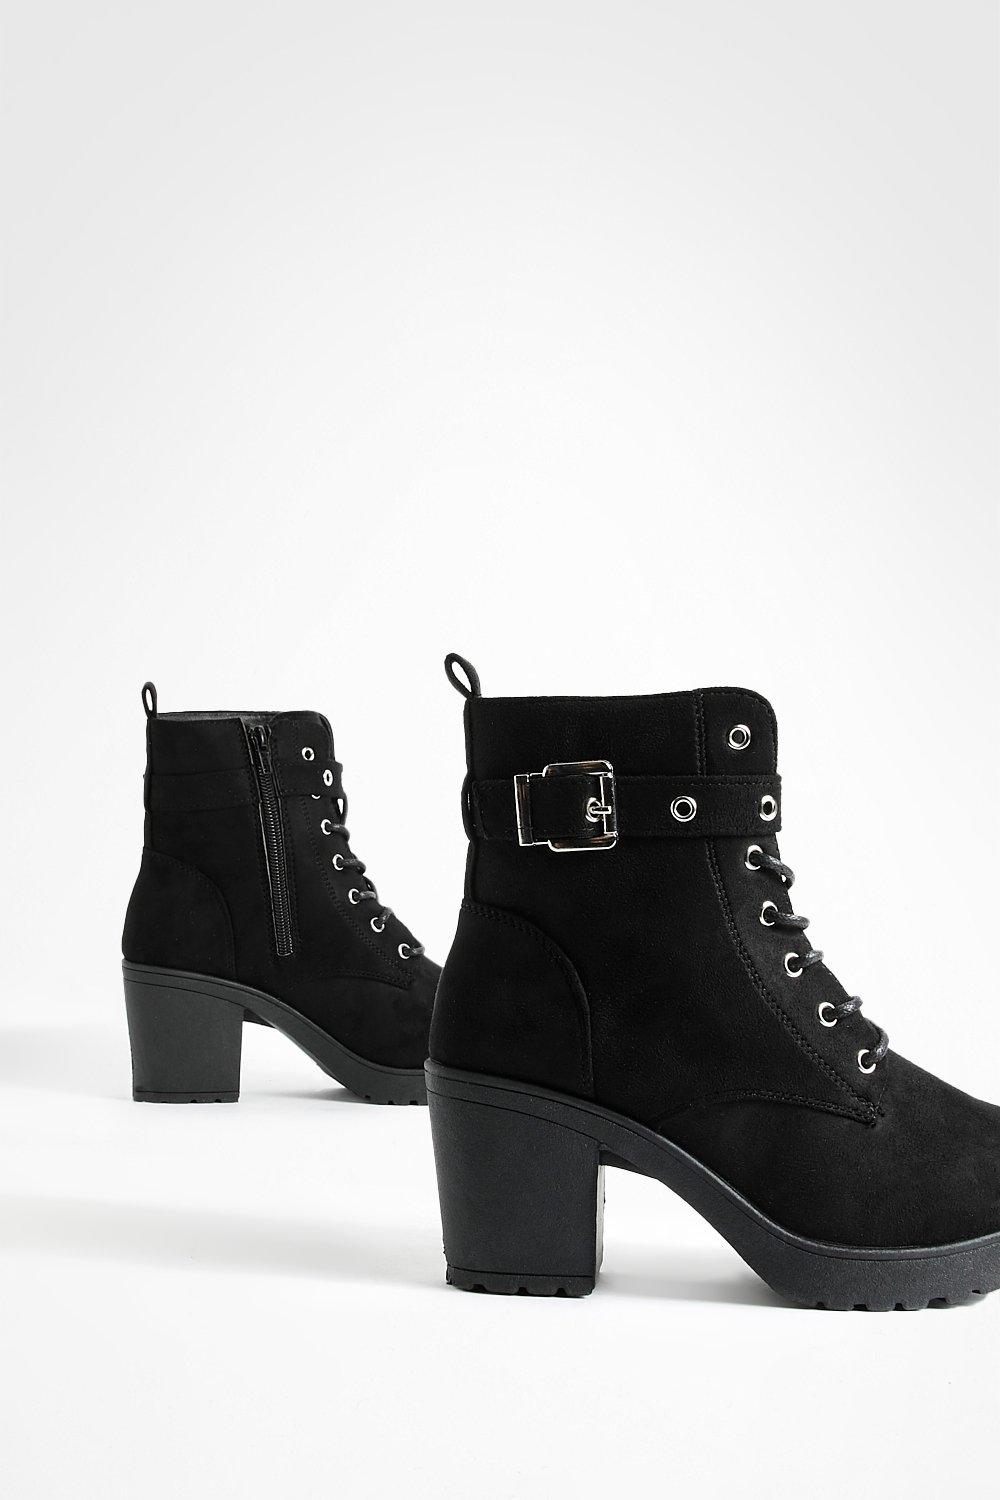 wide width lace up boots